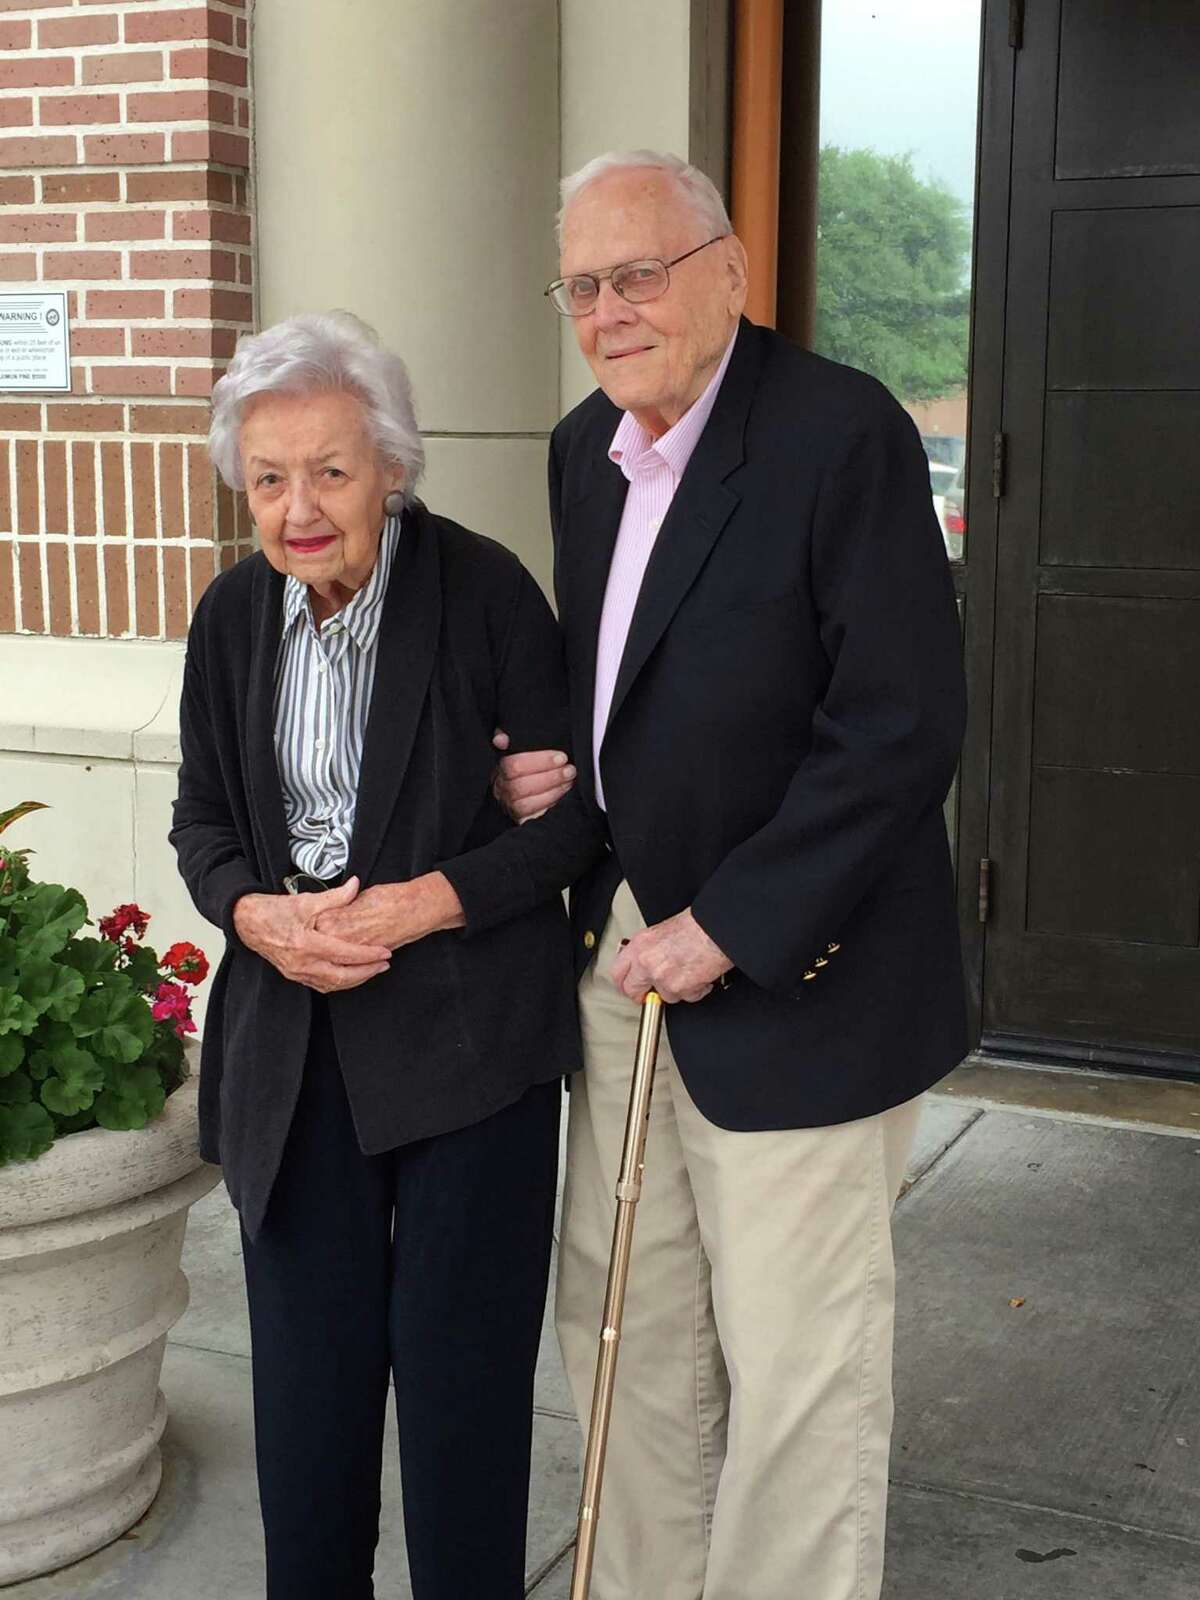 Dorothy and Ben Schleider have been happily married for 70 years. The two currently live at Belmont Village Senior Living in Hunter?’s Creek. The two celebrated their seventh decade together April 3 with other community members at the Village.